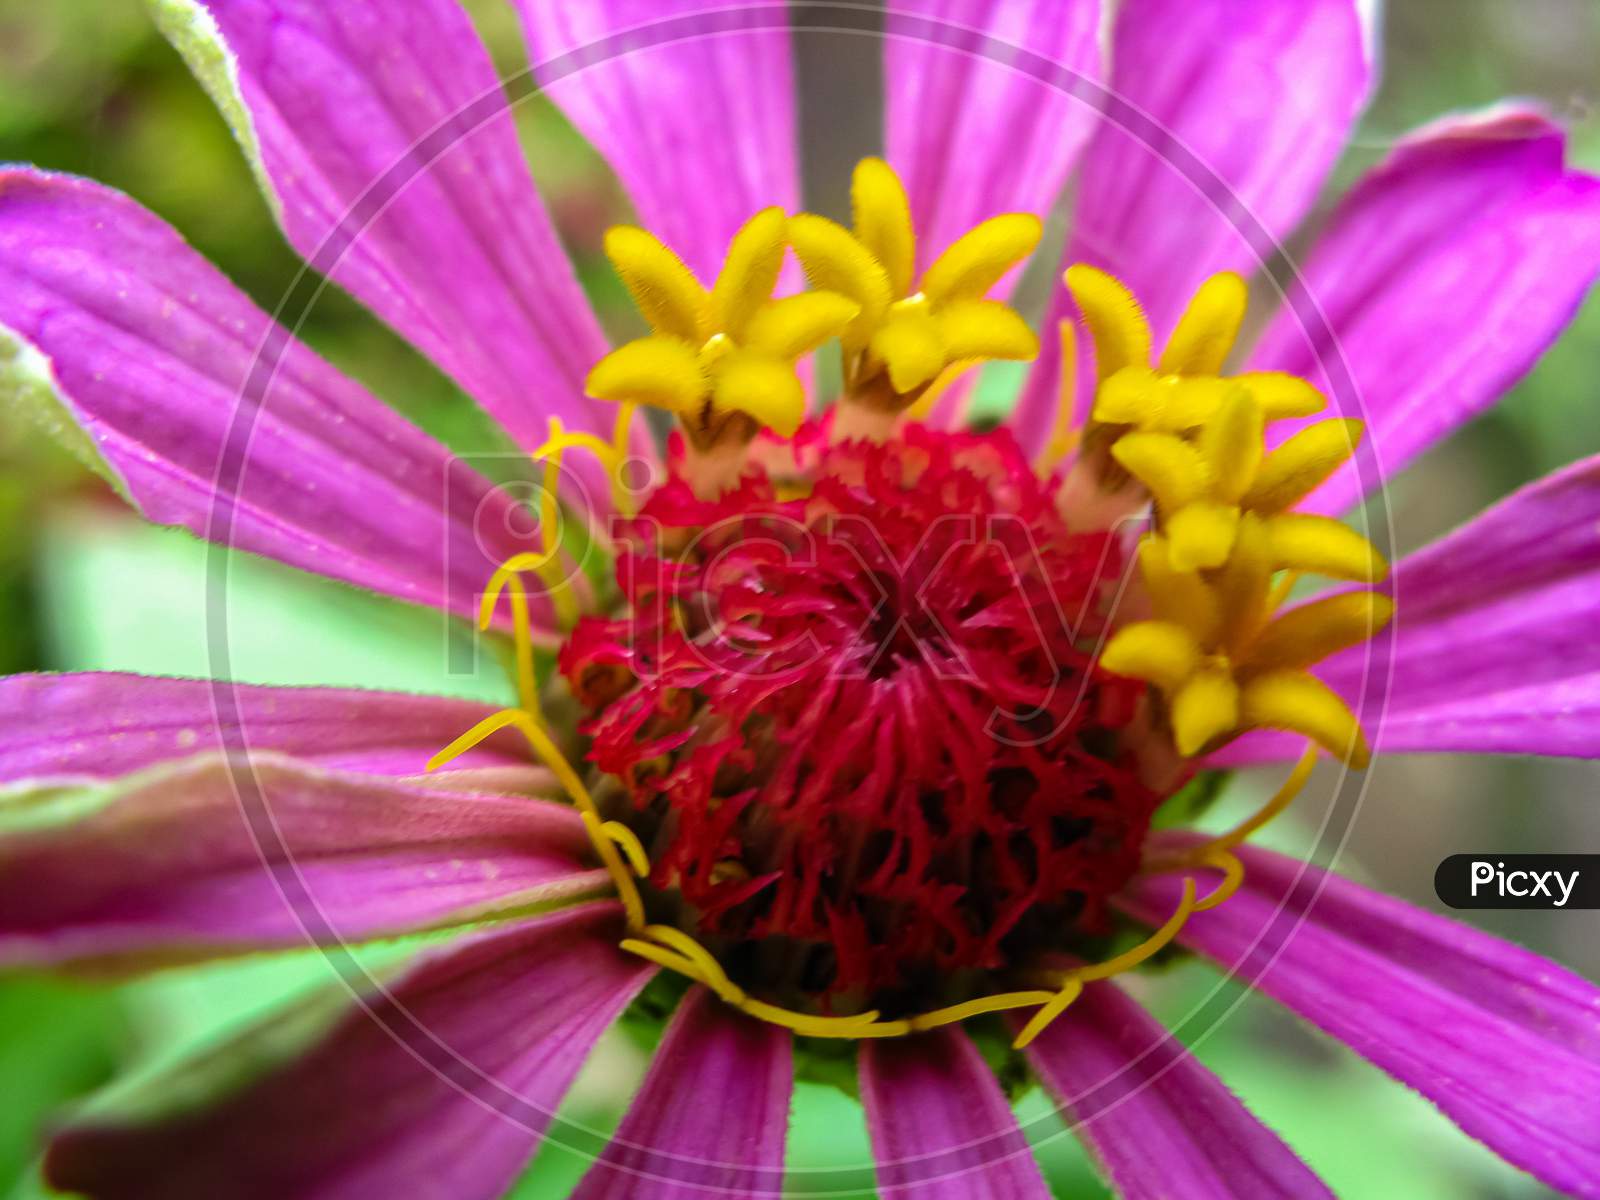 Macro image of a zinnia flower with vibrant colors and blur green background